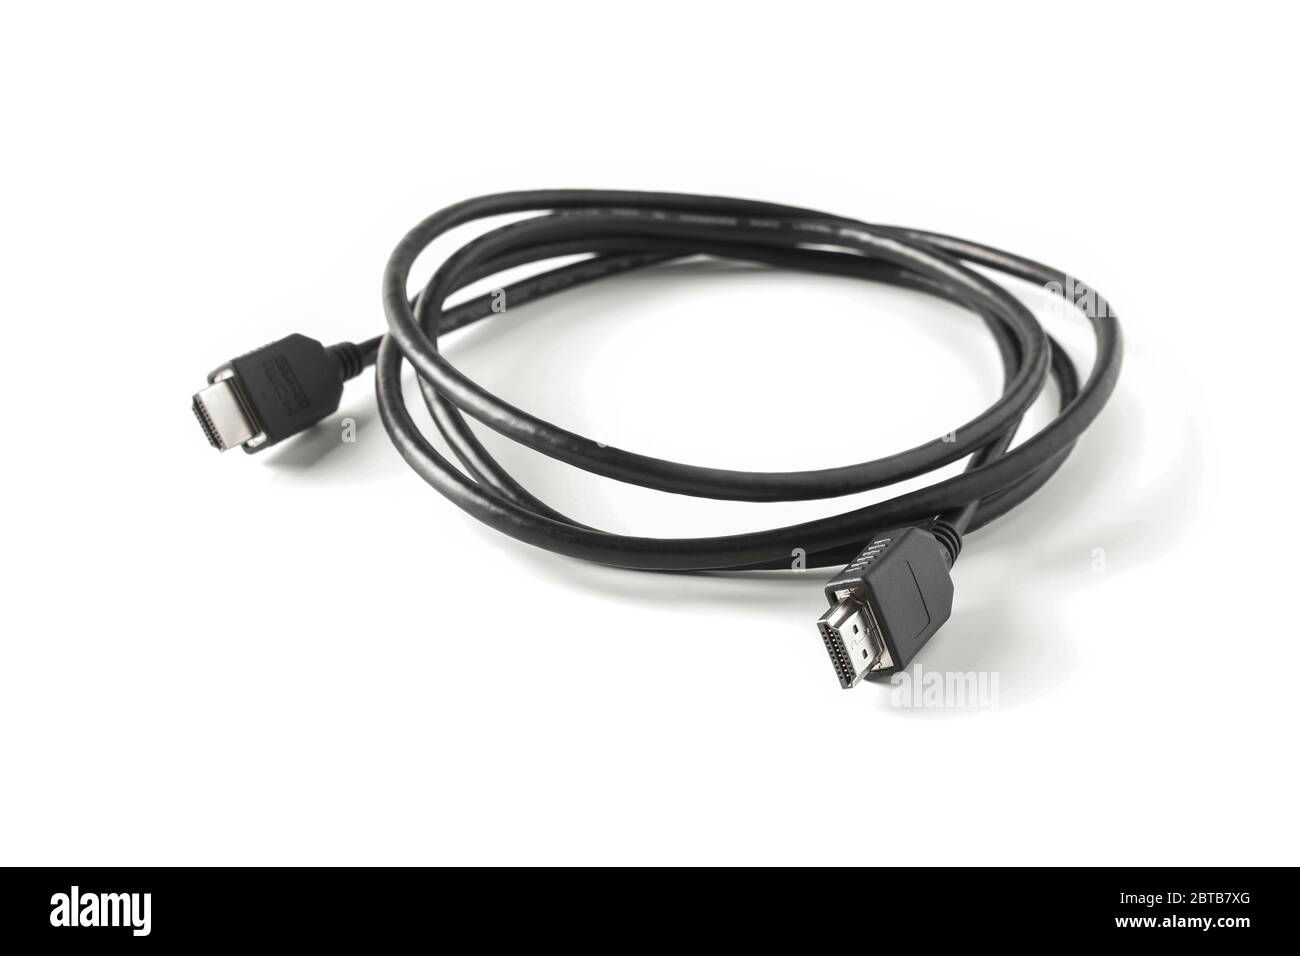 HDMI Cable close up isolated on white background Stock Photo - Alamy